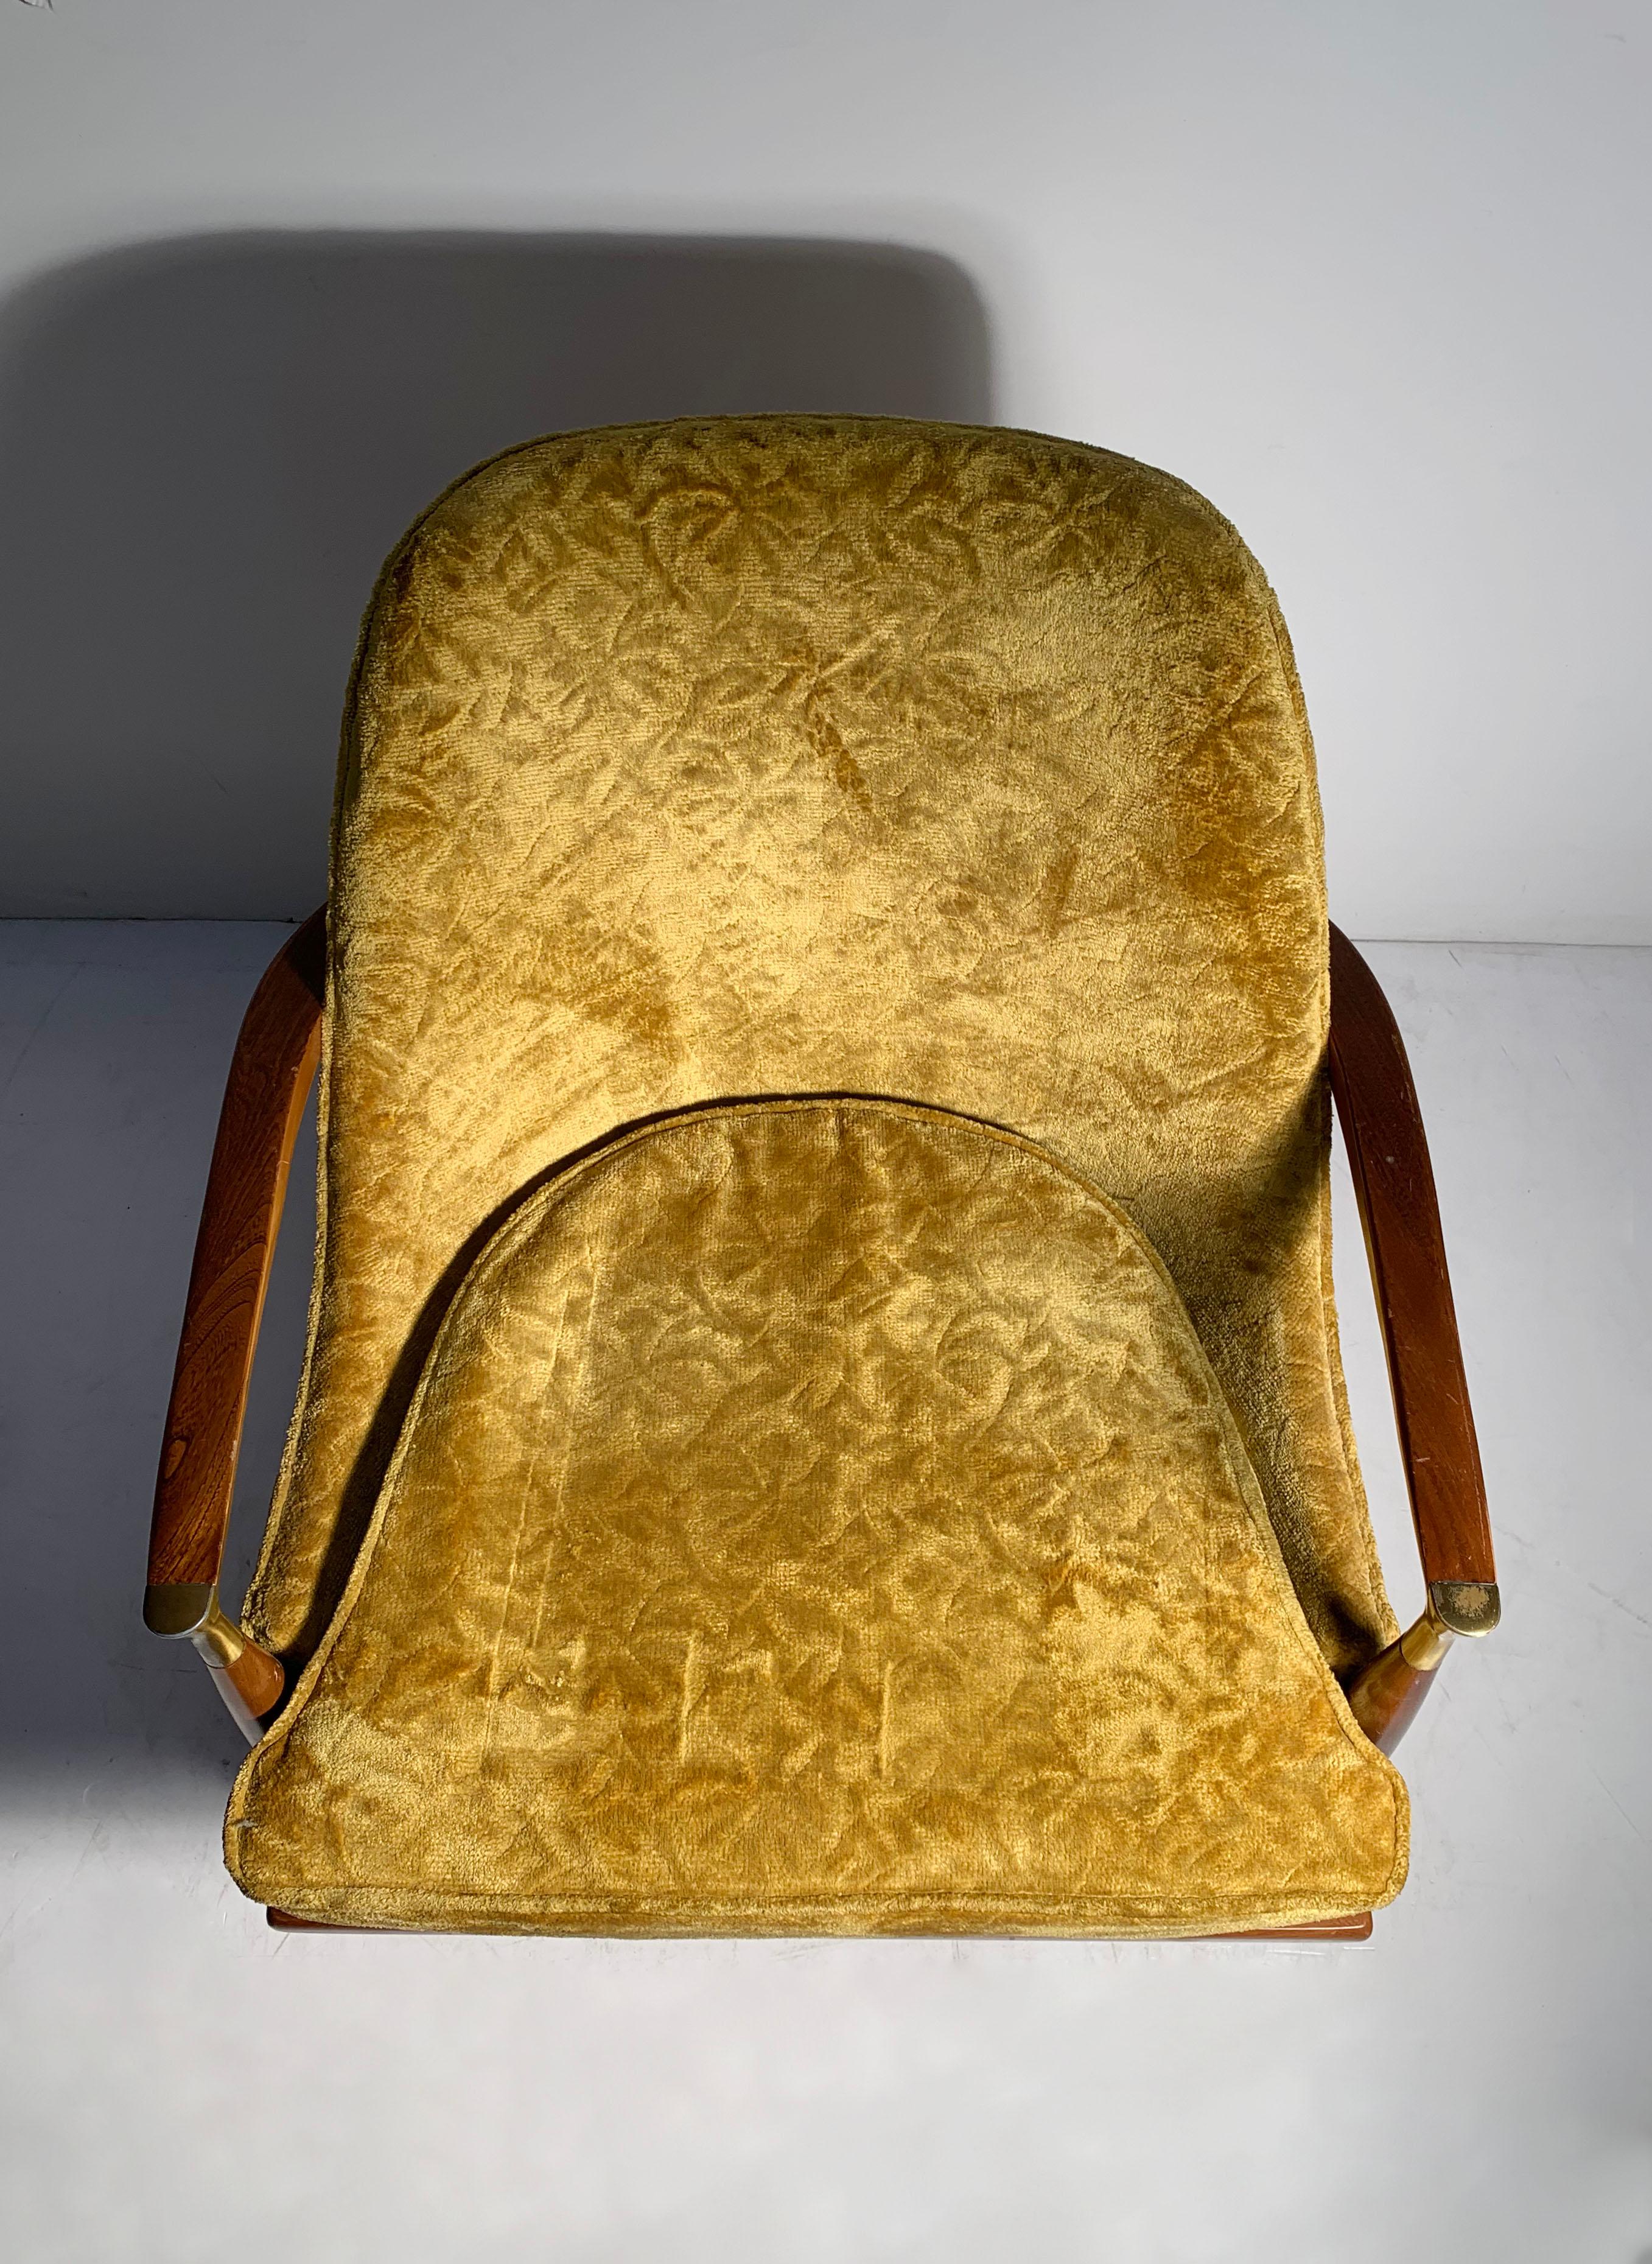 20th Century Jamestown Royal Vintage Lounge Chair in the manner of Kofod Larsen For Sale